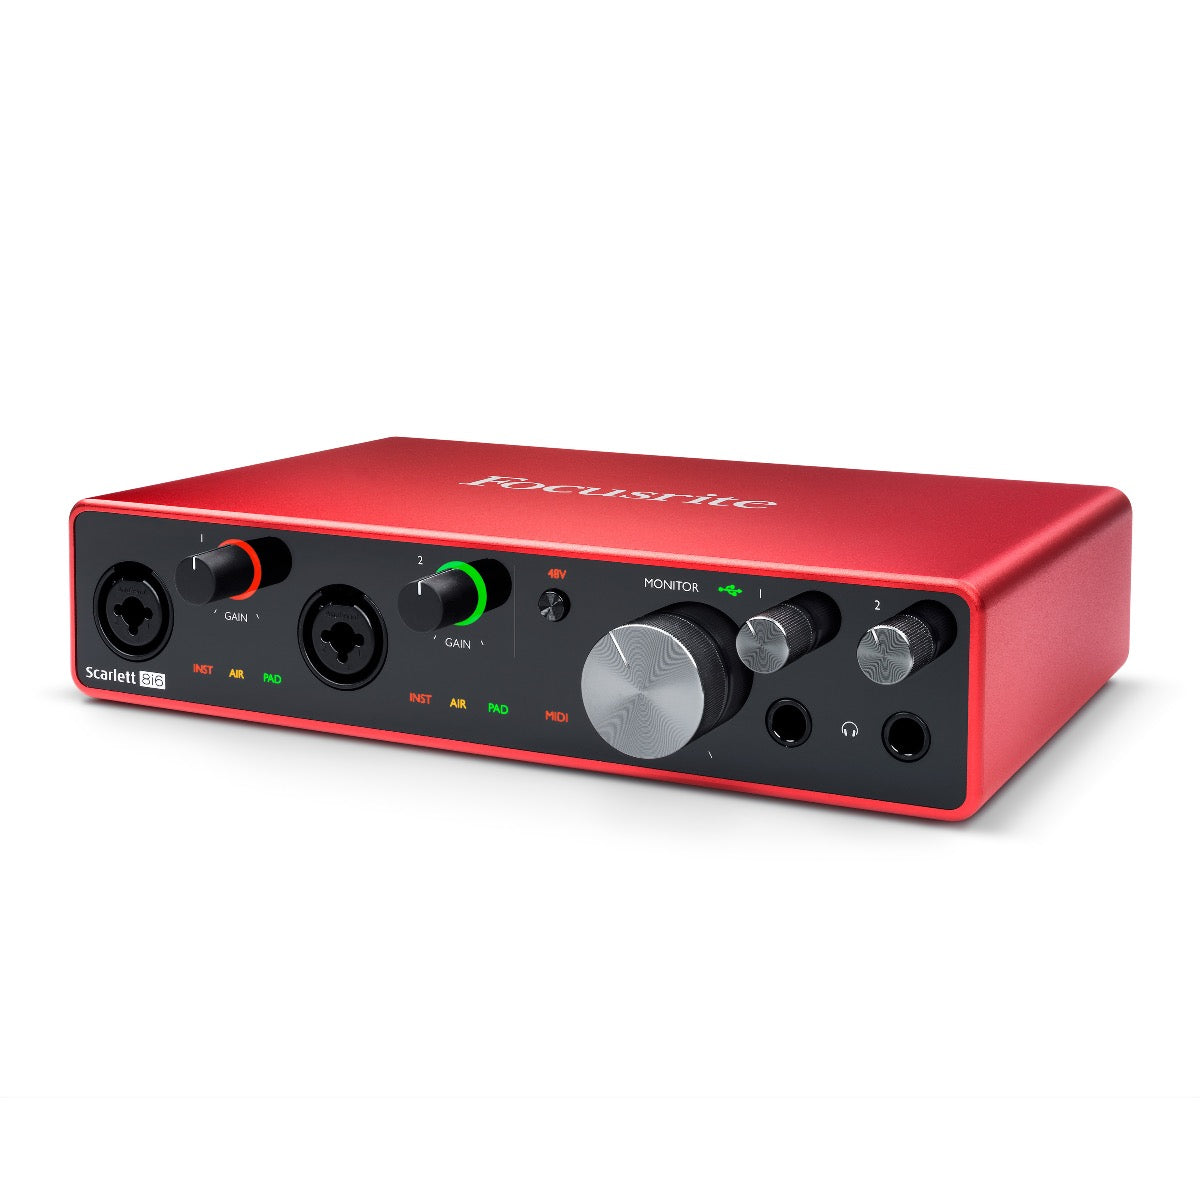 Focusrite Scarlett 8i6 Audio Interface with Cables